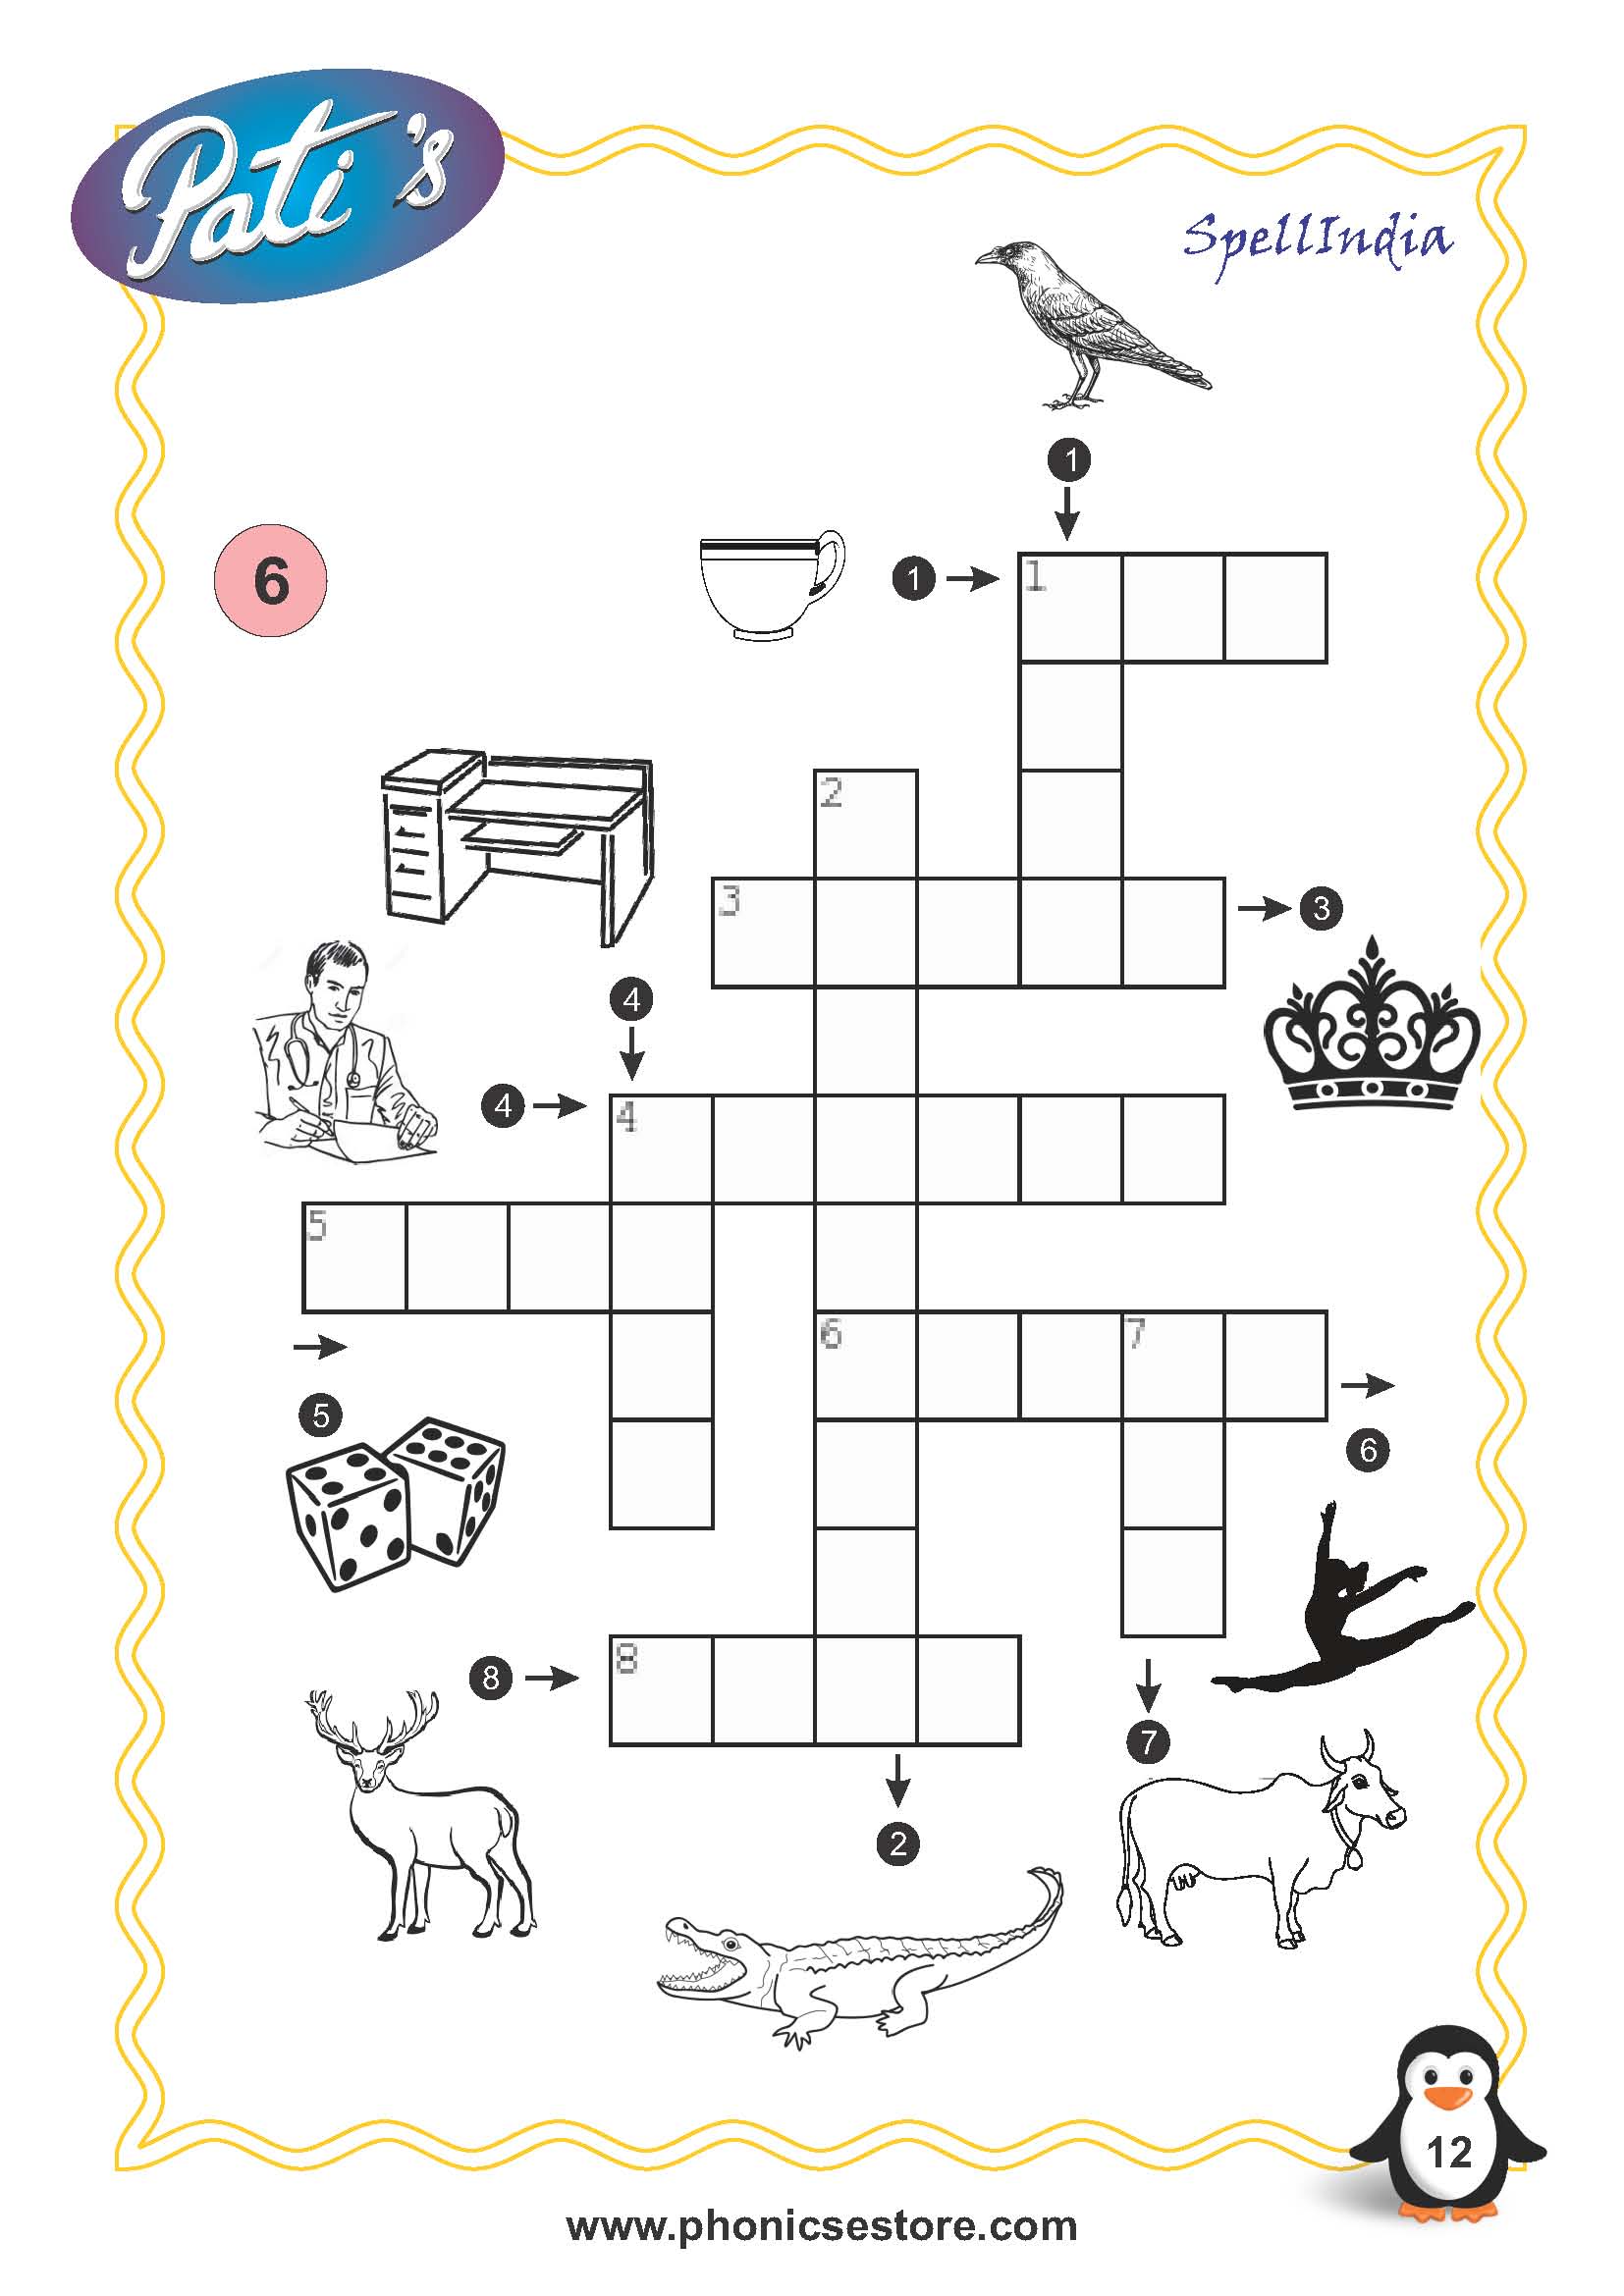 picture crossword for children spell bee academy book at amazon